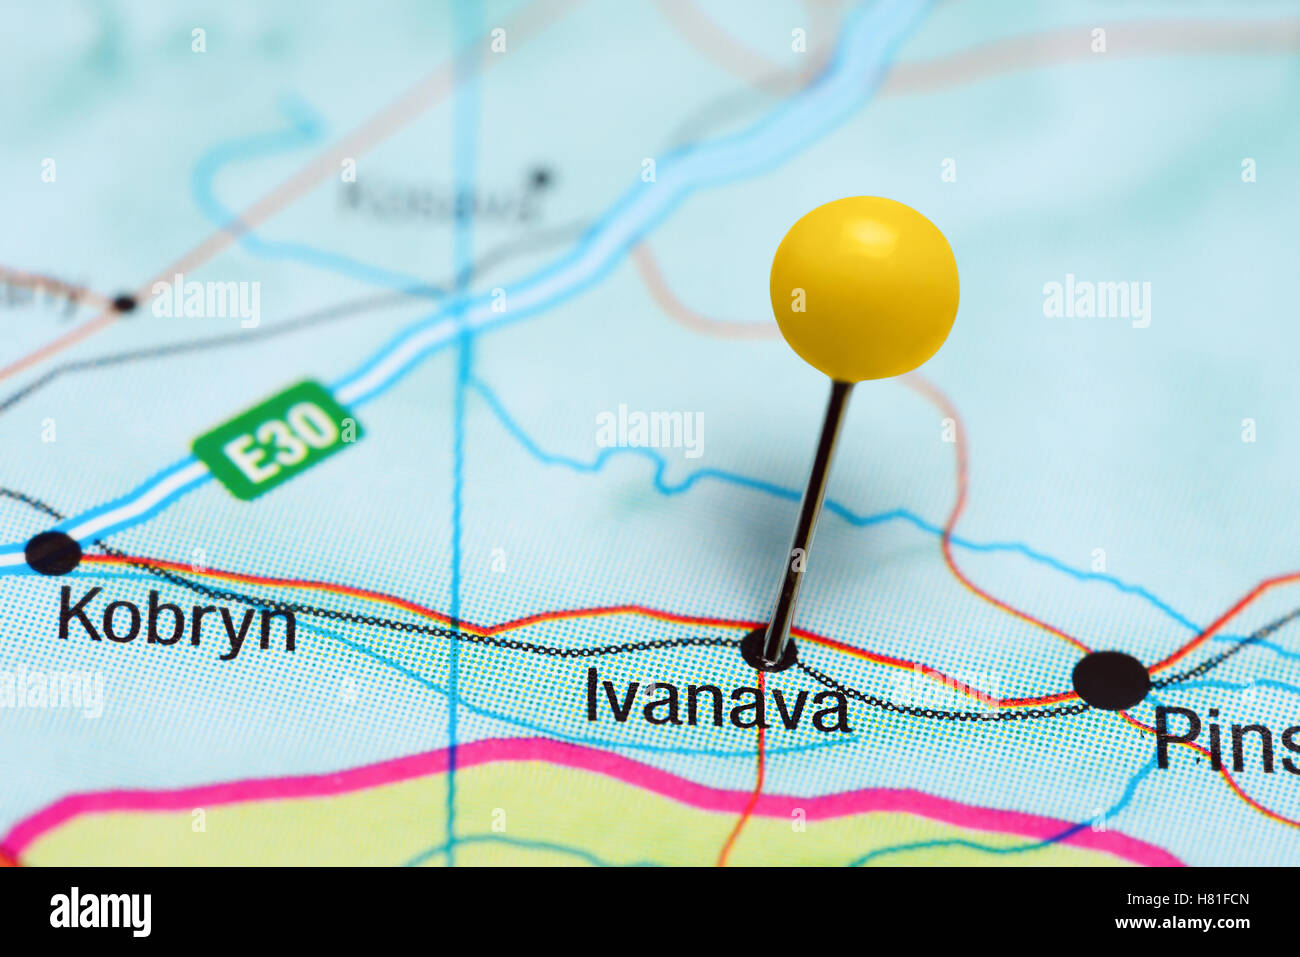 Ivanava pinned on a map of Belarus Stock Photo